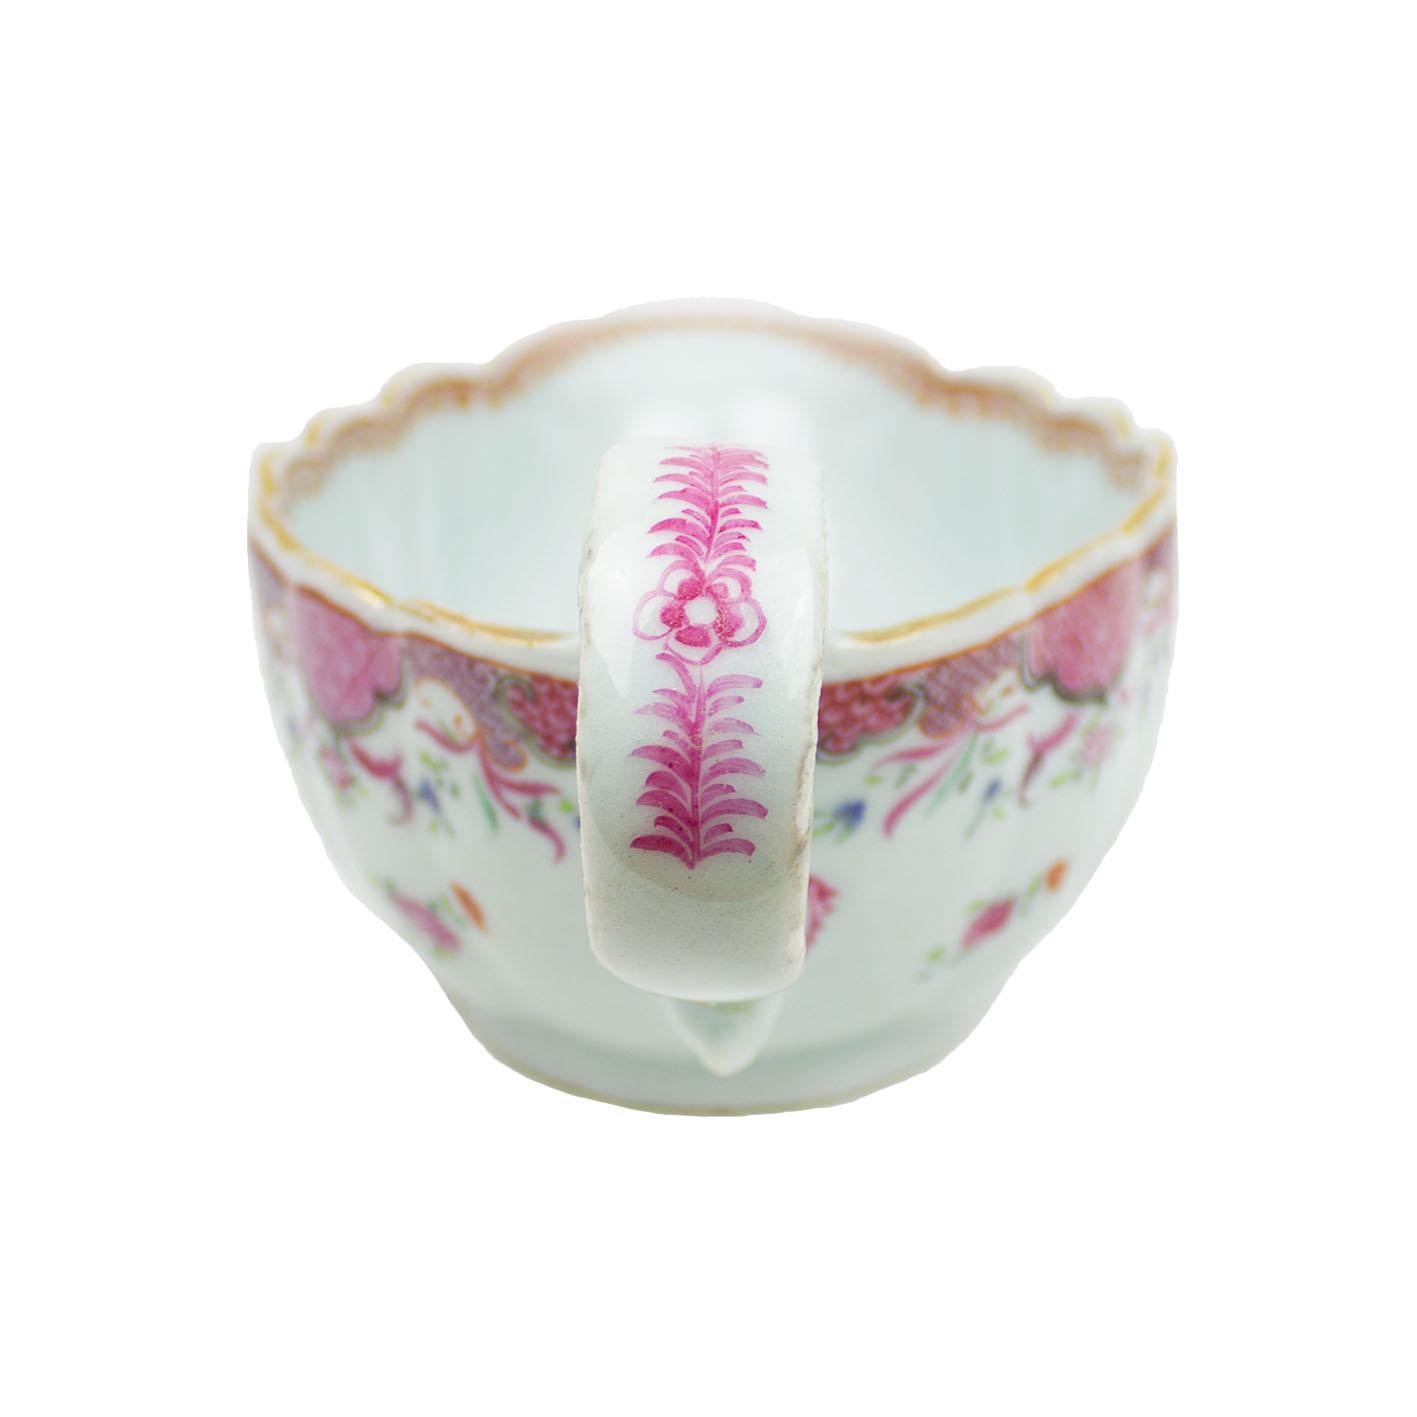 Chinese Export Porcelain Saucer Boat, Qianlong, '1736-1795' For Sale 1